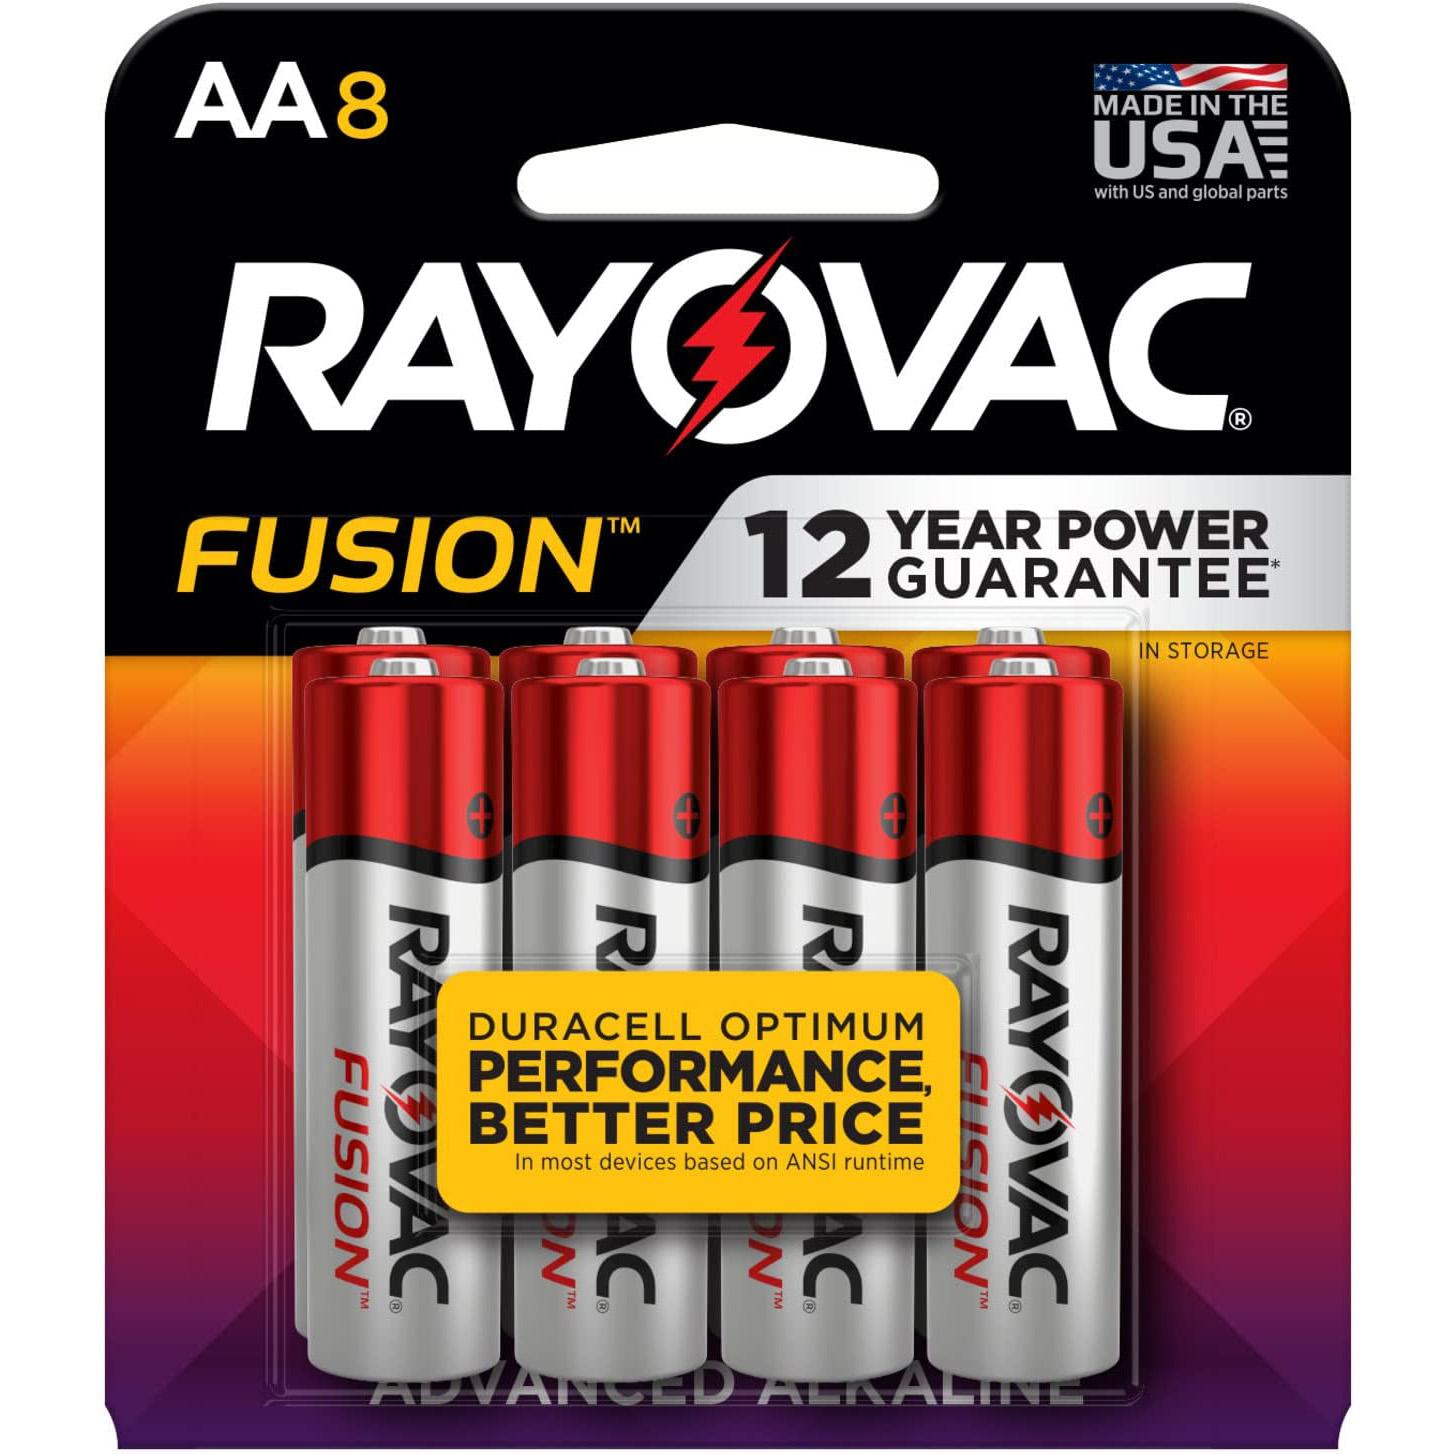 Rayovac AA Fusion Premium Alkaline Batteries 8 Pack for $2.59 Shipped